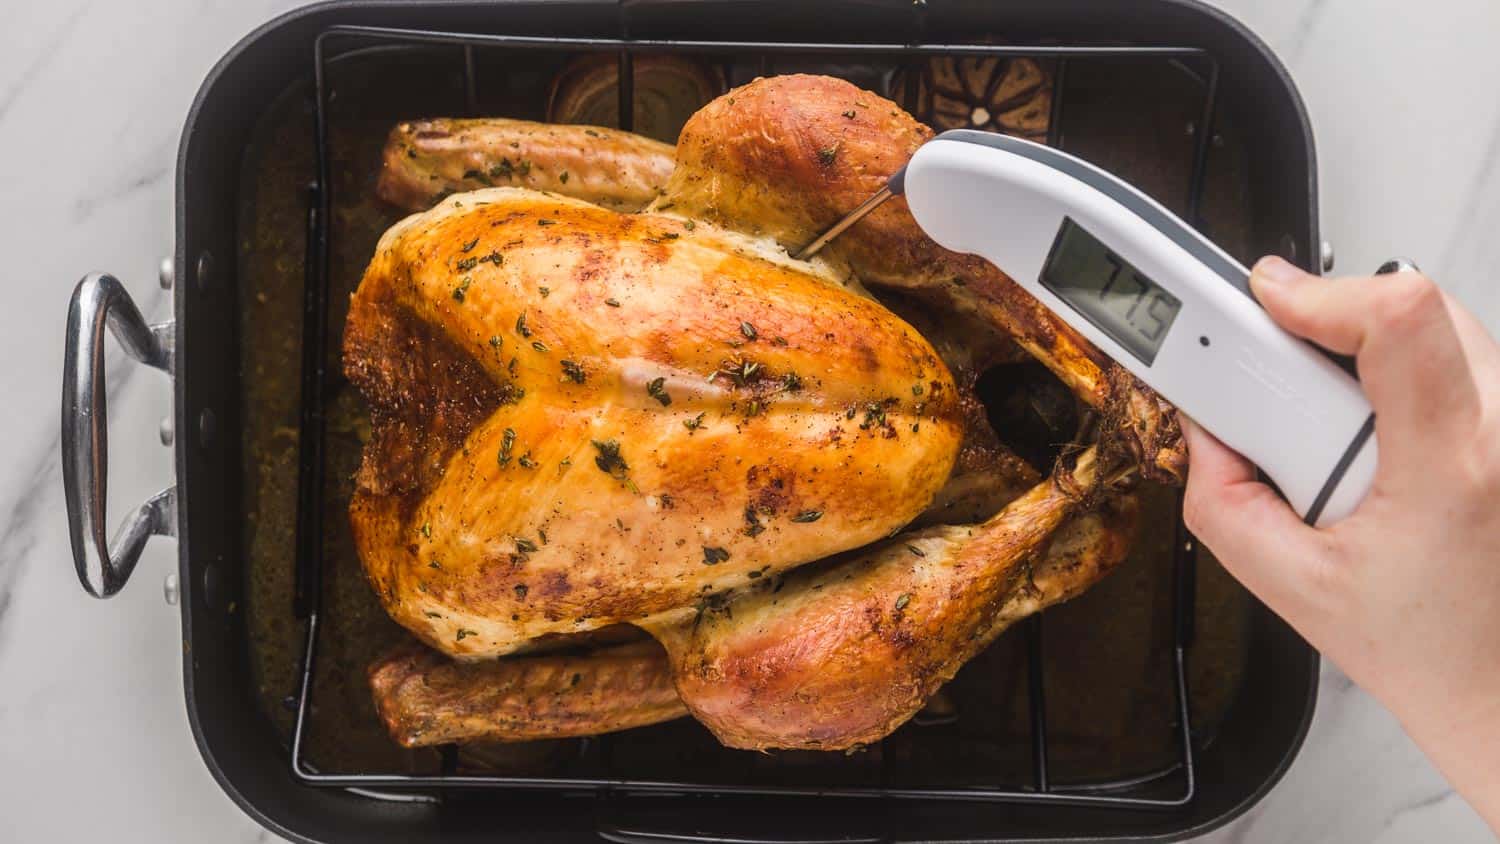 Checking the temperature of the dark meat (turkey) with a Thermapen kitchen thermometer